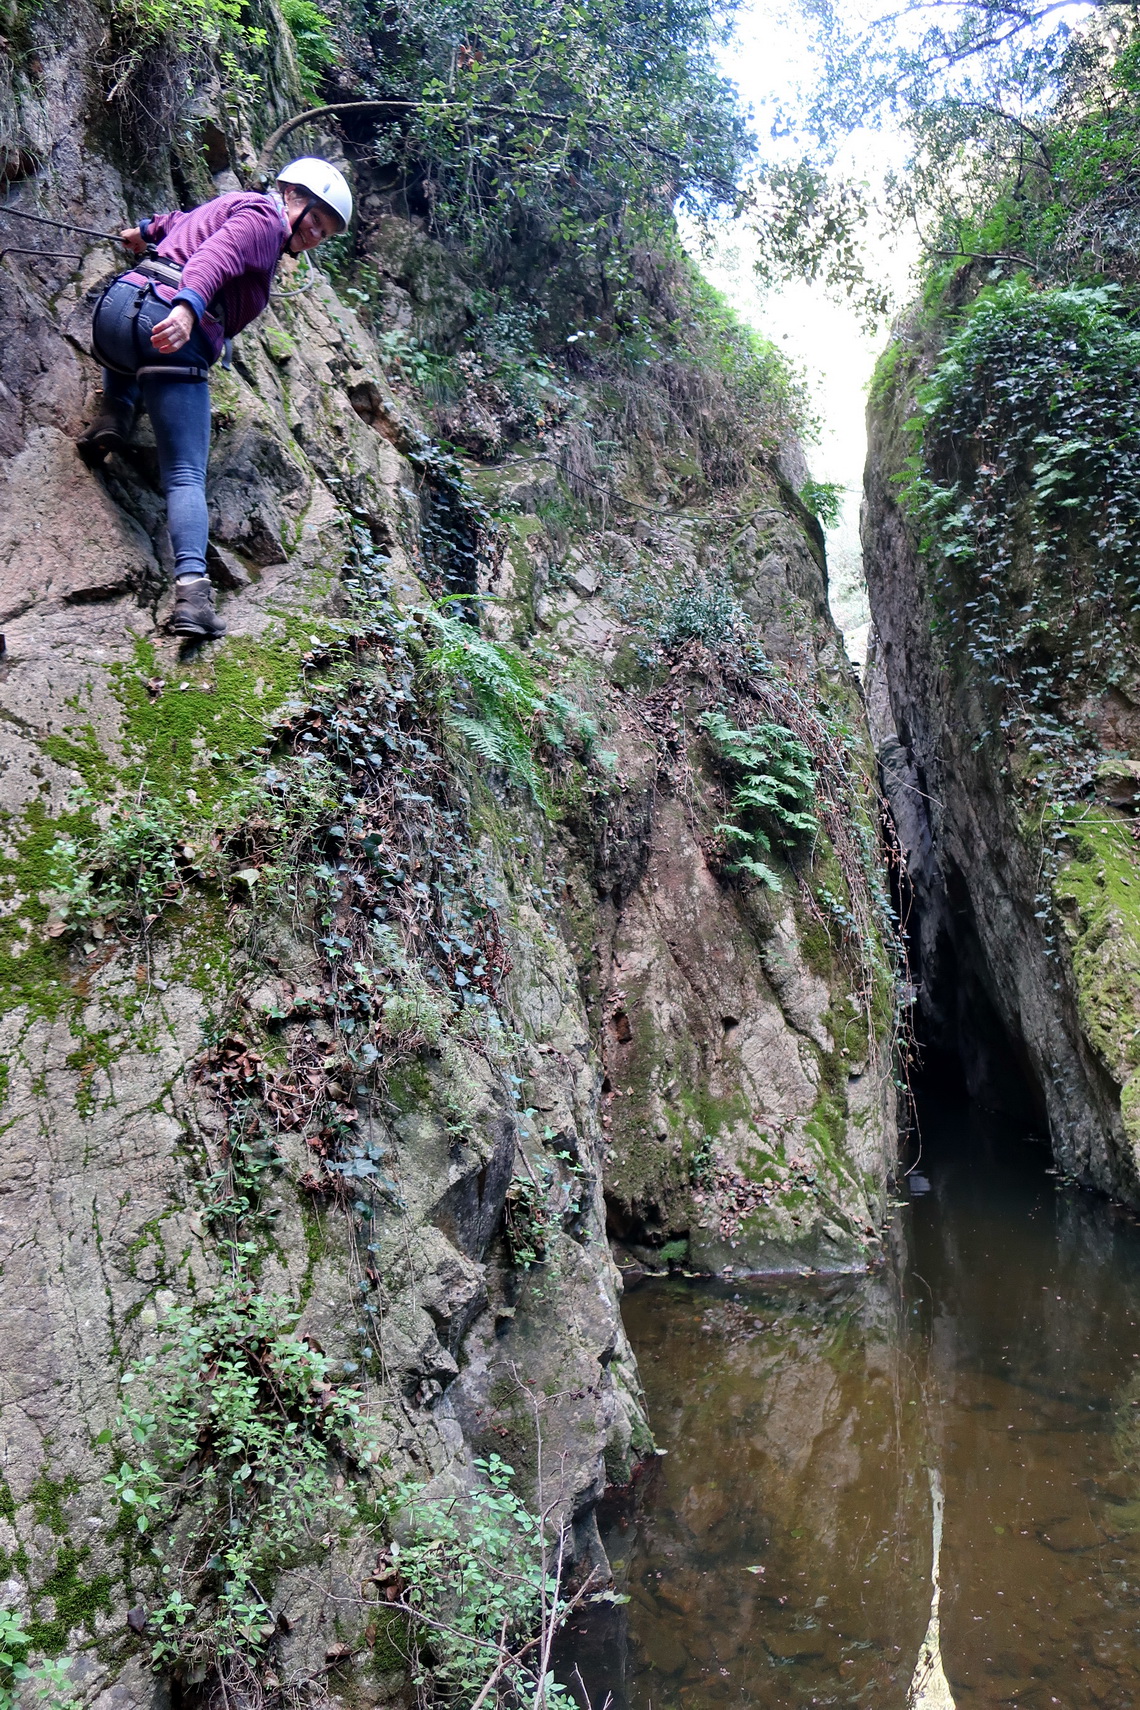 Marion in front of the gap of the Gorges de Salenys